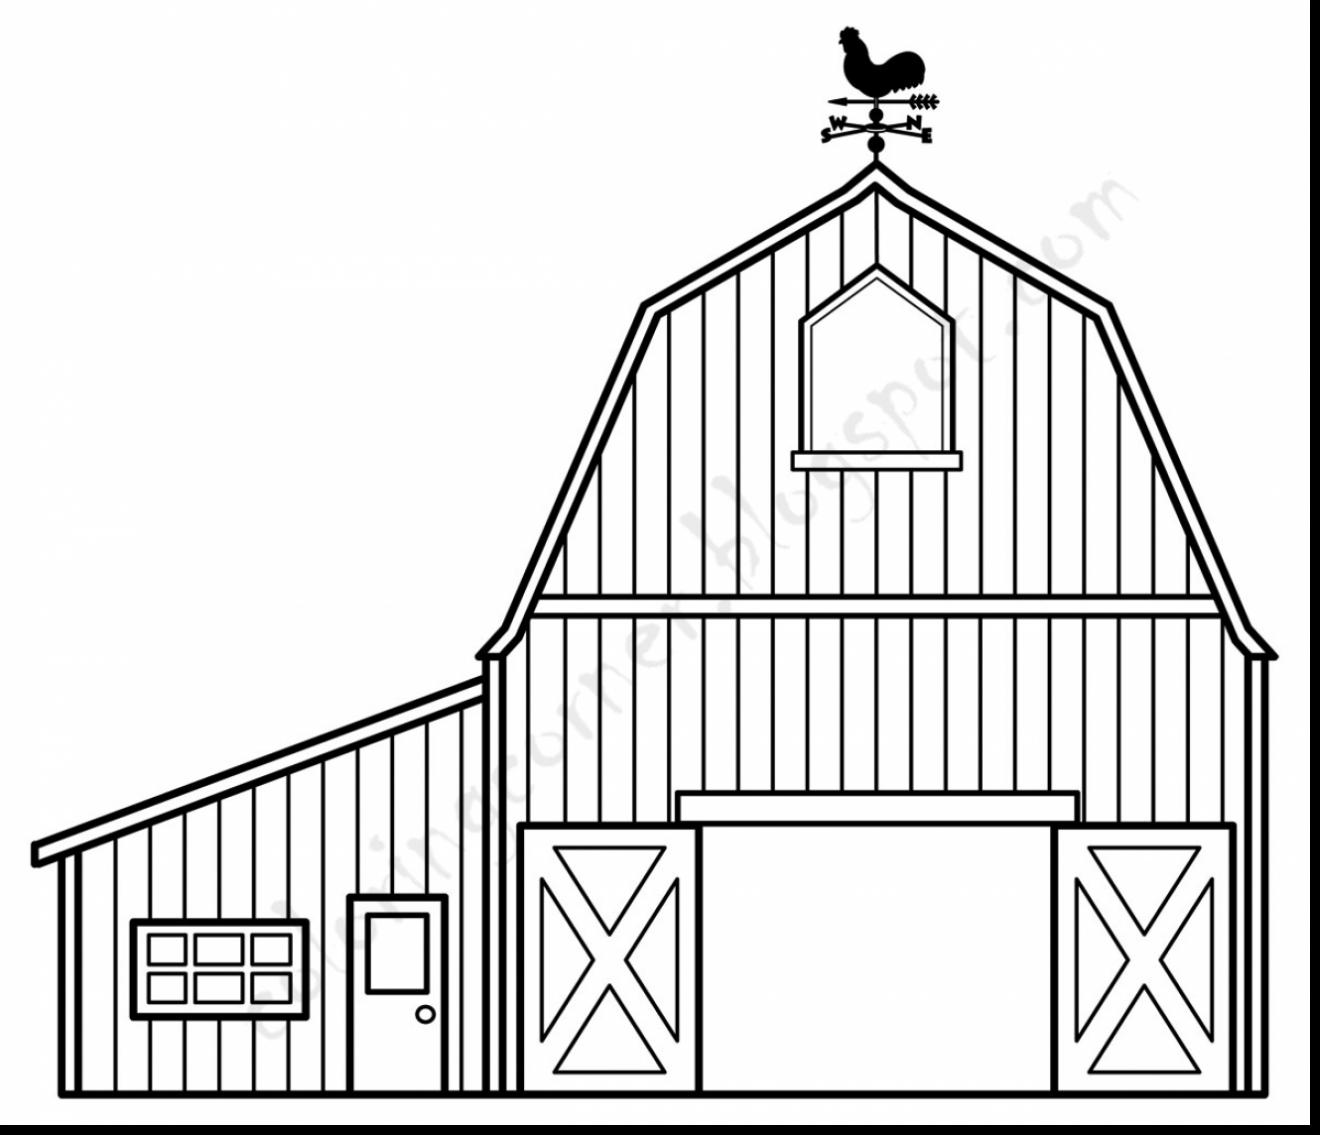 free-barn-outline-pictures-clipartix